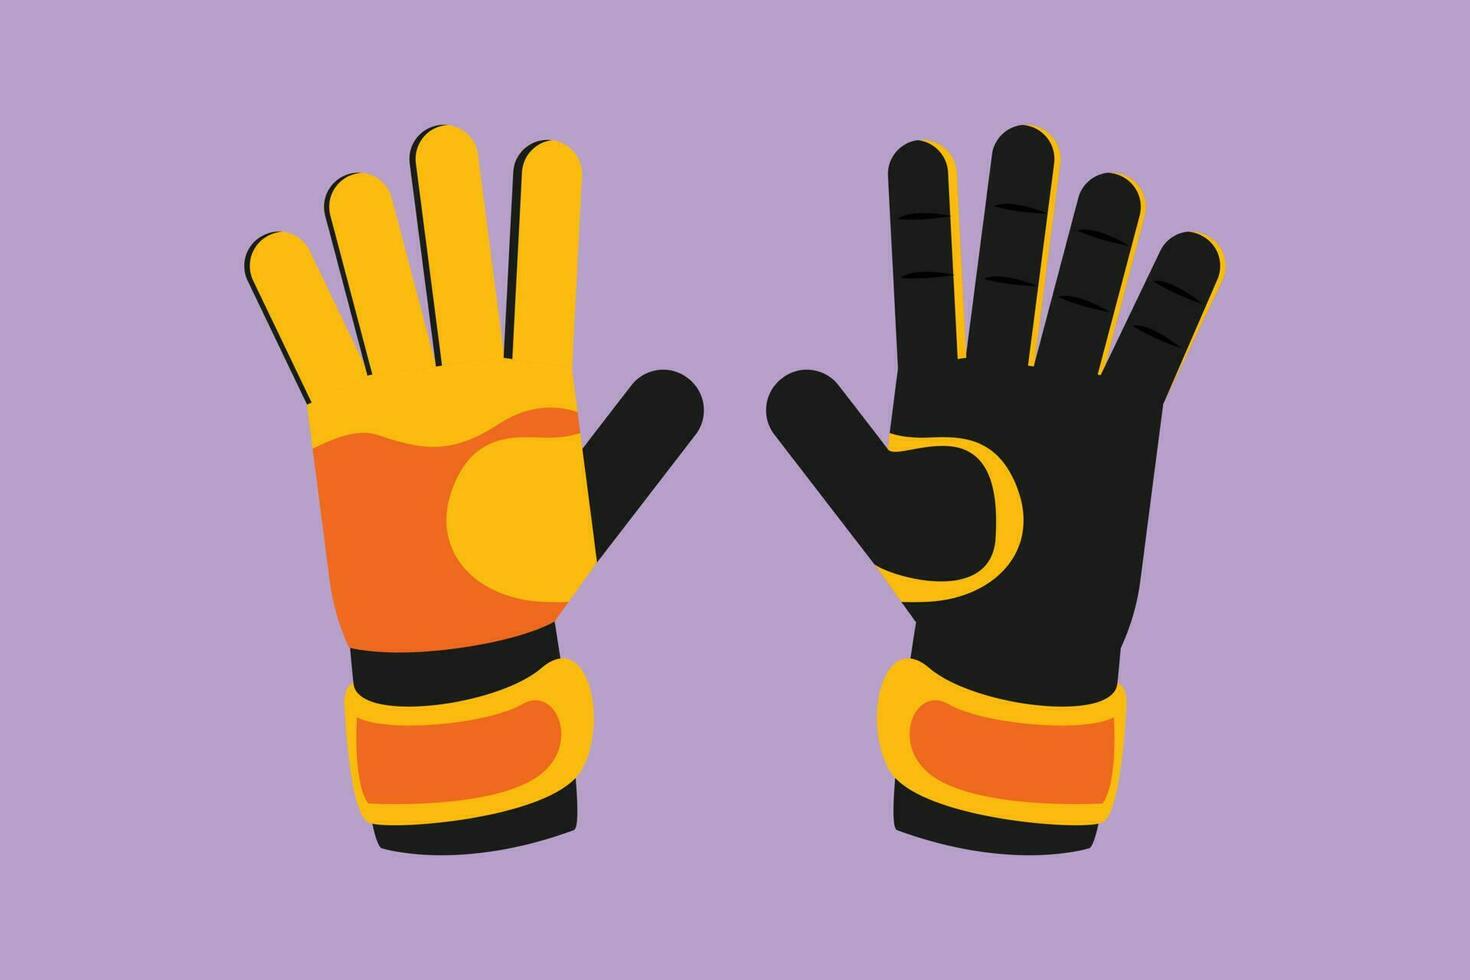 Graphic flat design drawing pair of soccer goalkeeper gloves logo. Goalkeeper protection gloves. Outdoor sport icon. Sports inventory for competition game tournament. Cartoon style vector illustration